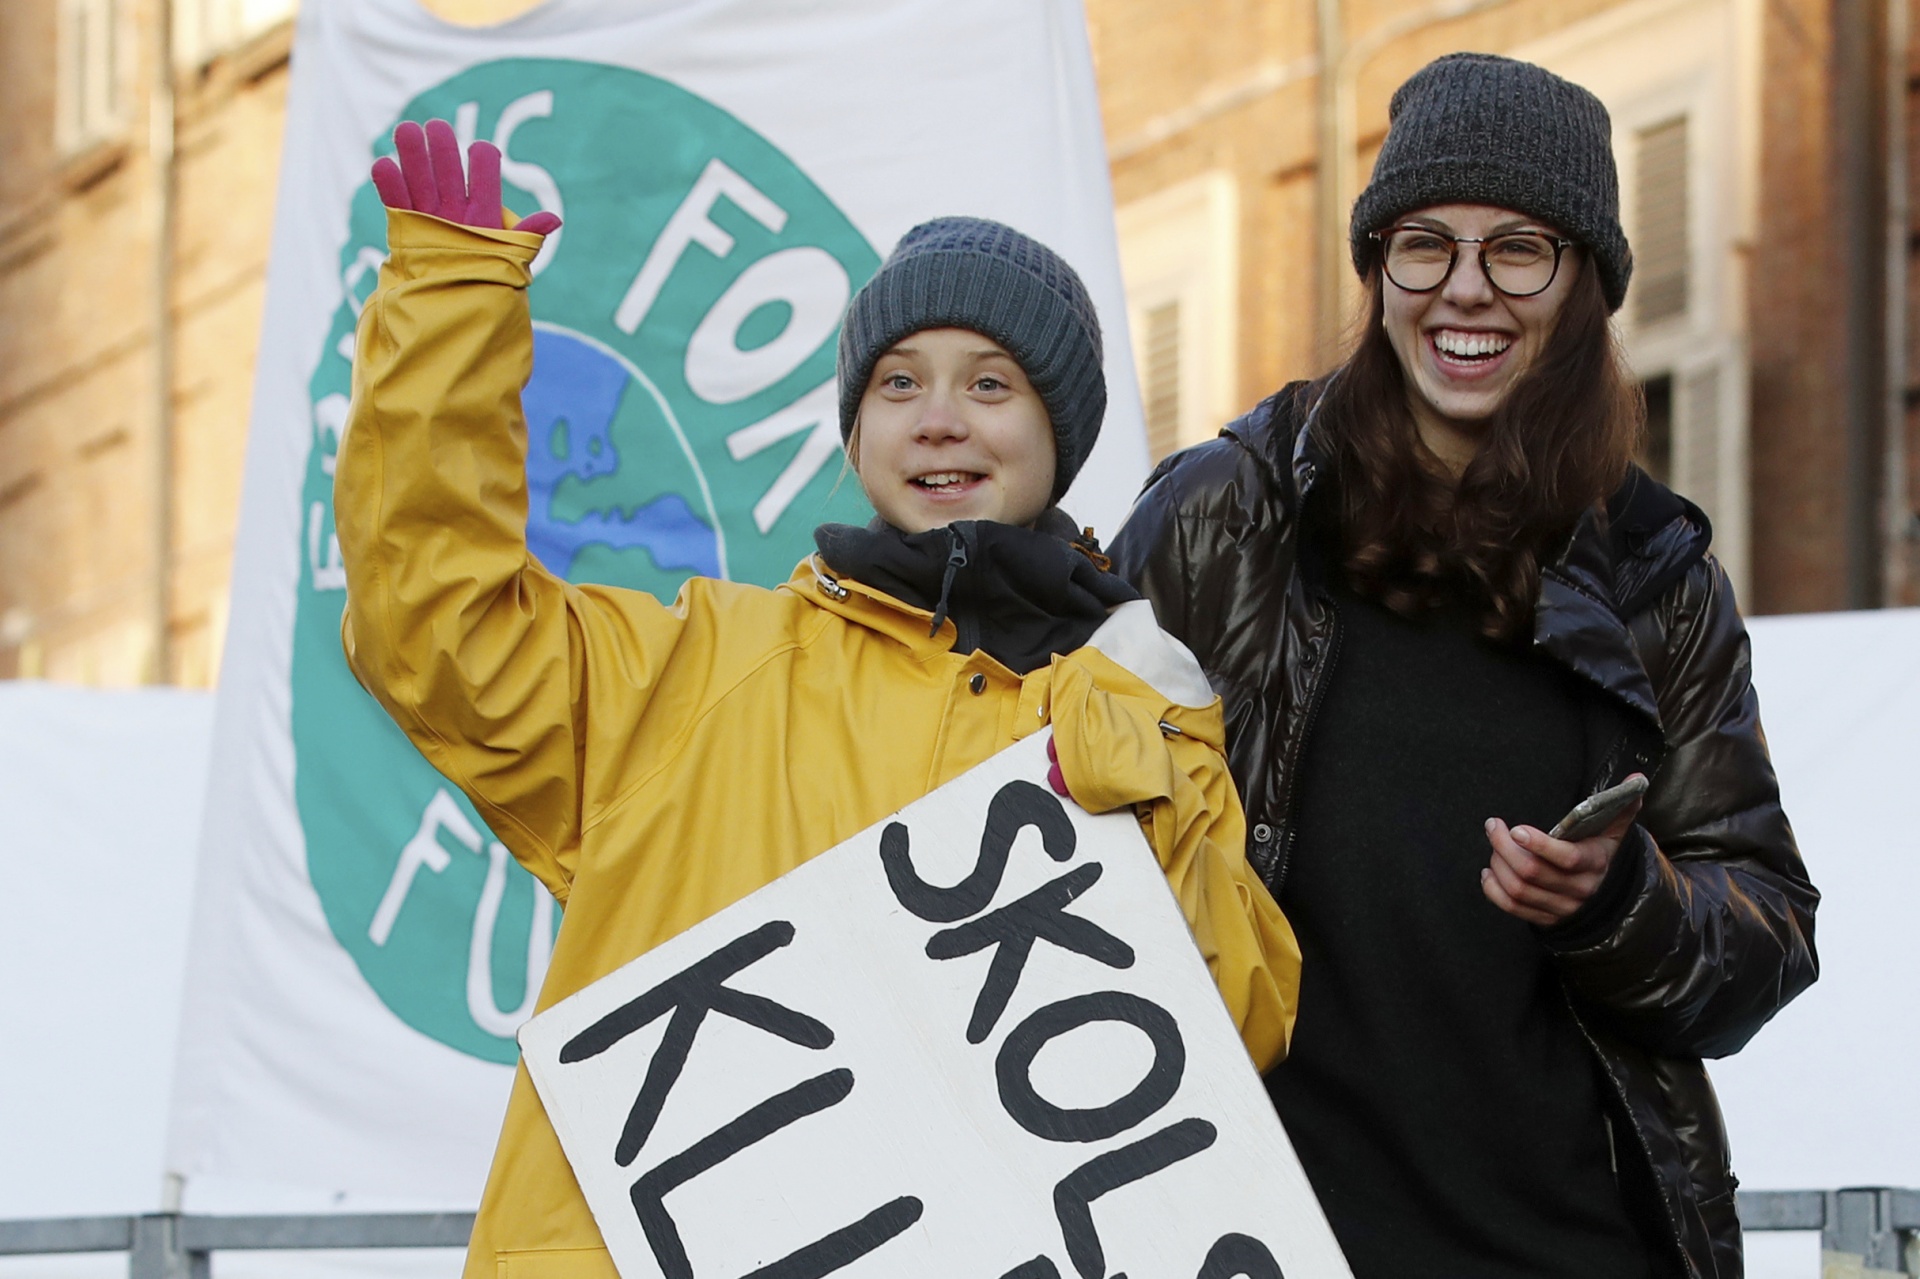 Swedish environmental activist Greta Thunberg holds a sign with writing reading in Swedish, "School strike for the climate" as she attends a climate march, in Turin, Italy